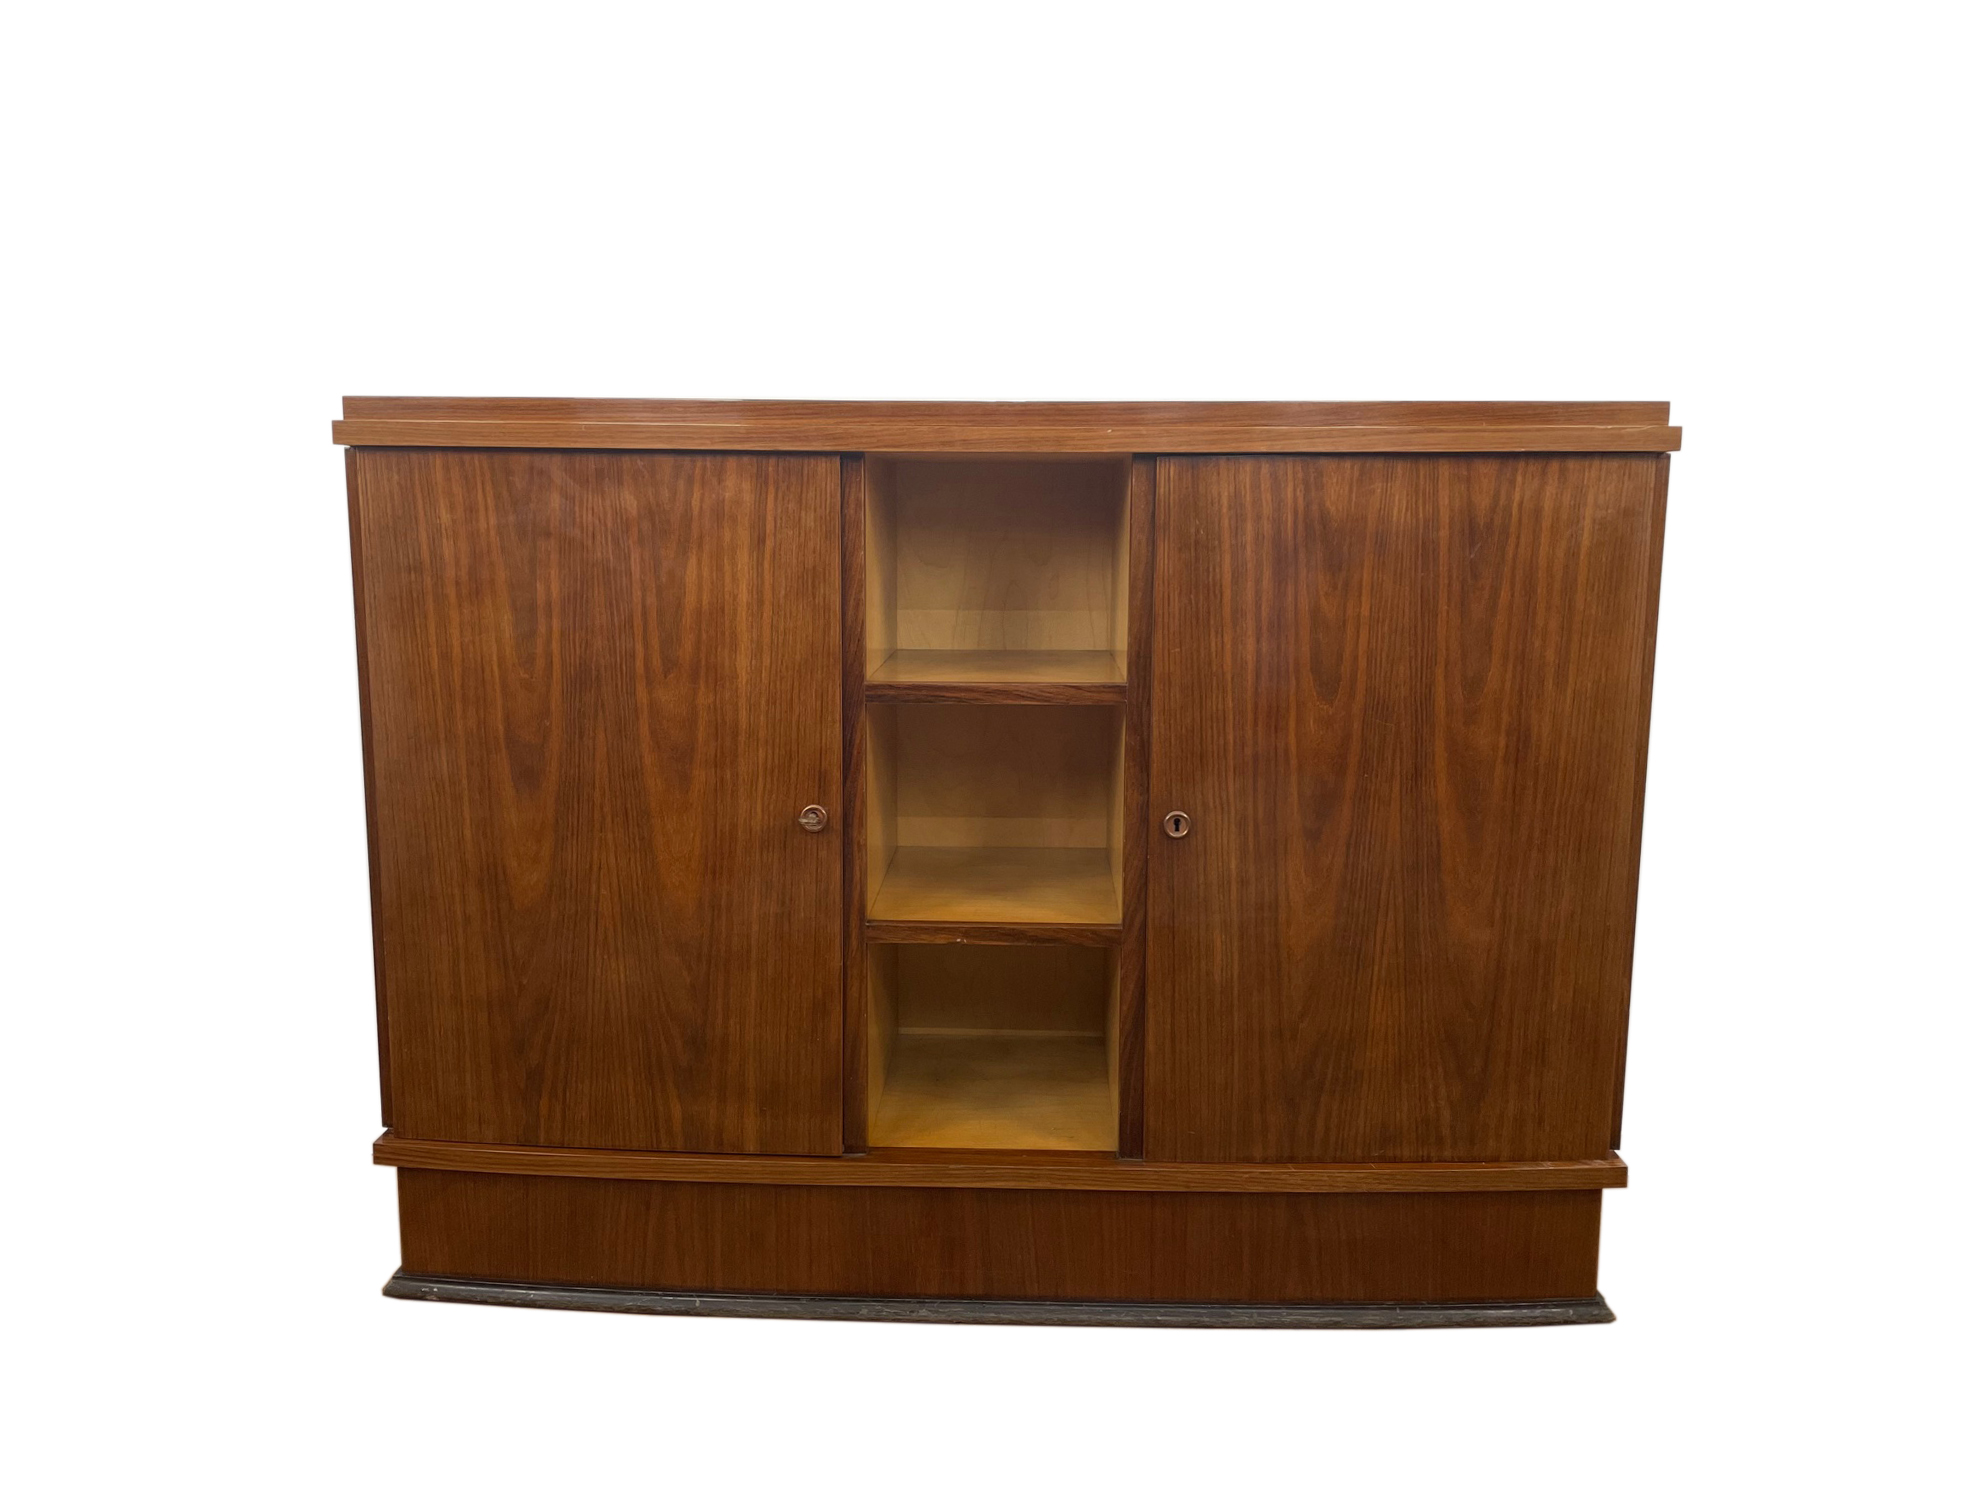 Art Deco chest of drawers / bar in rosewood from France around 1935 with an open compartment